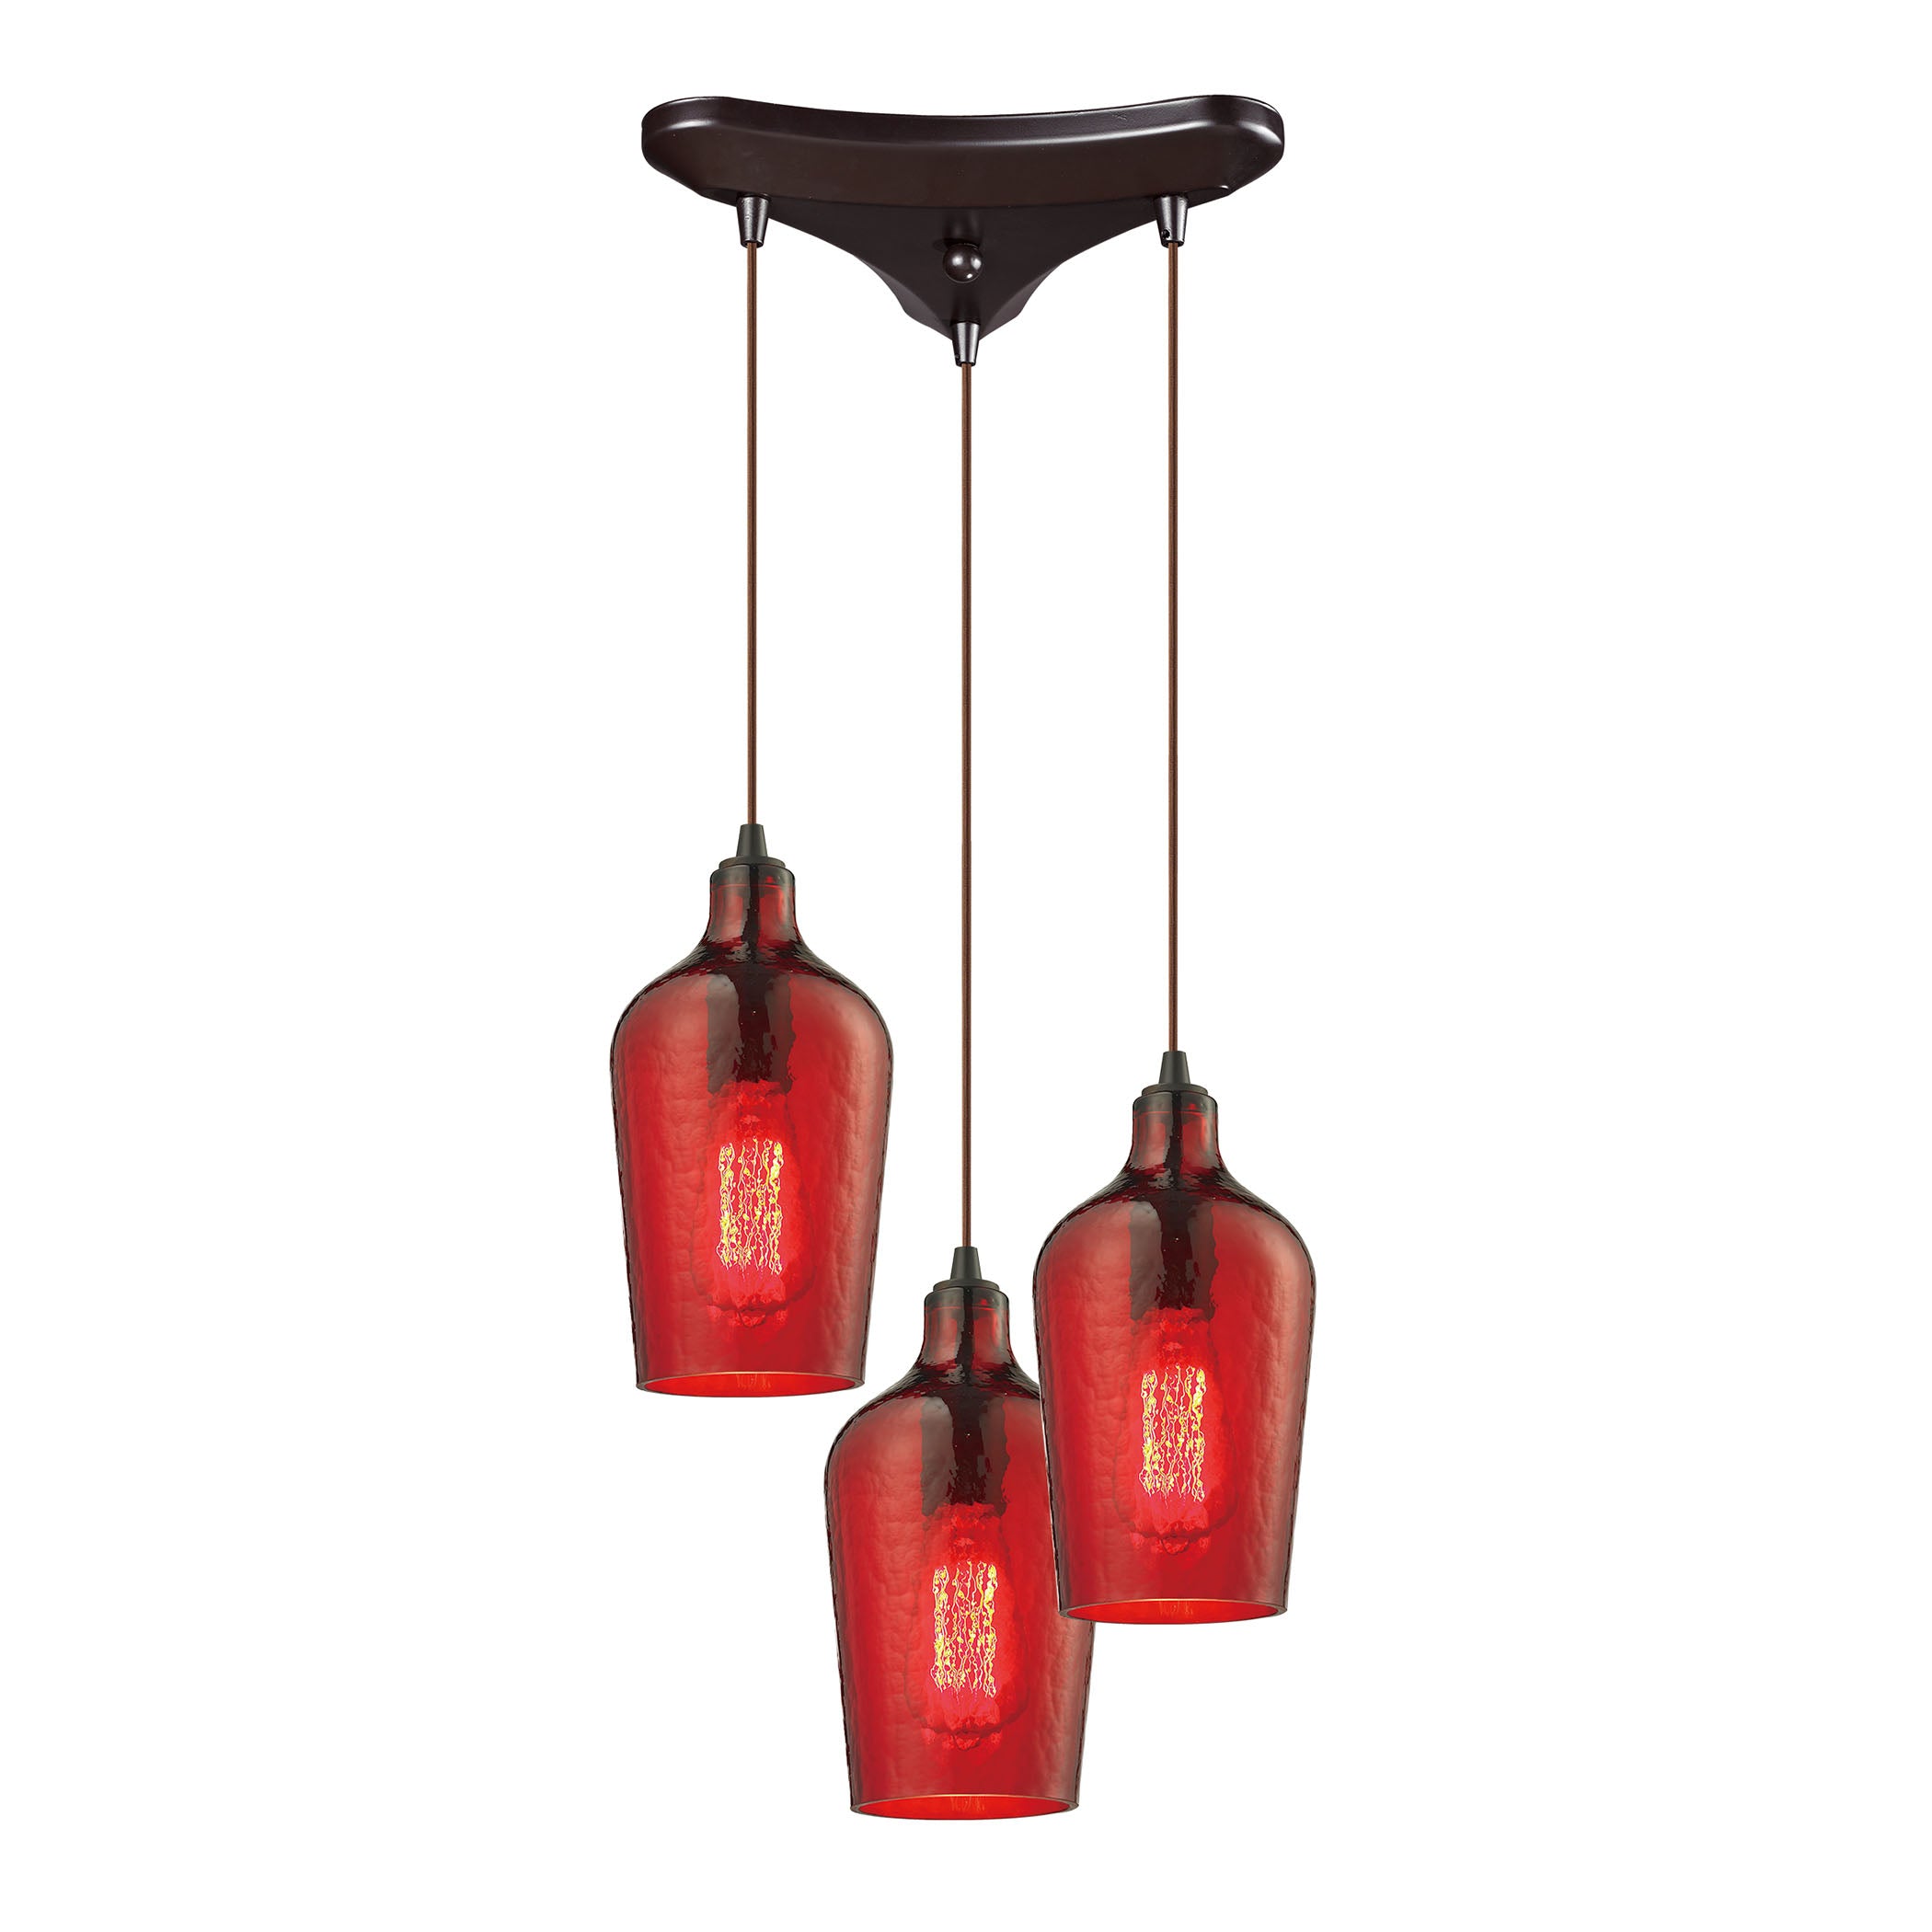 ELK Lighting 10331/3HRD Hammered Glass 3-Light Triangular Pendant Fixture in Oiled Bronze with Hammered Red Glass